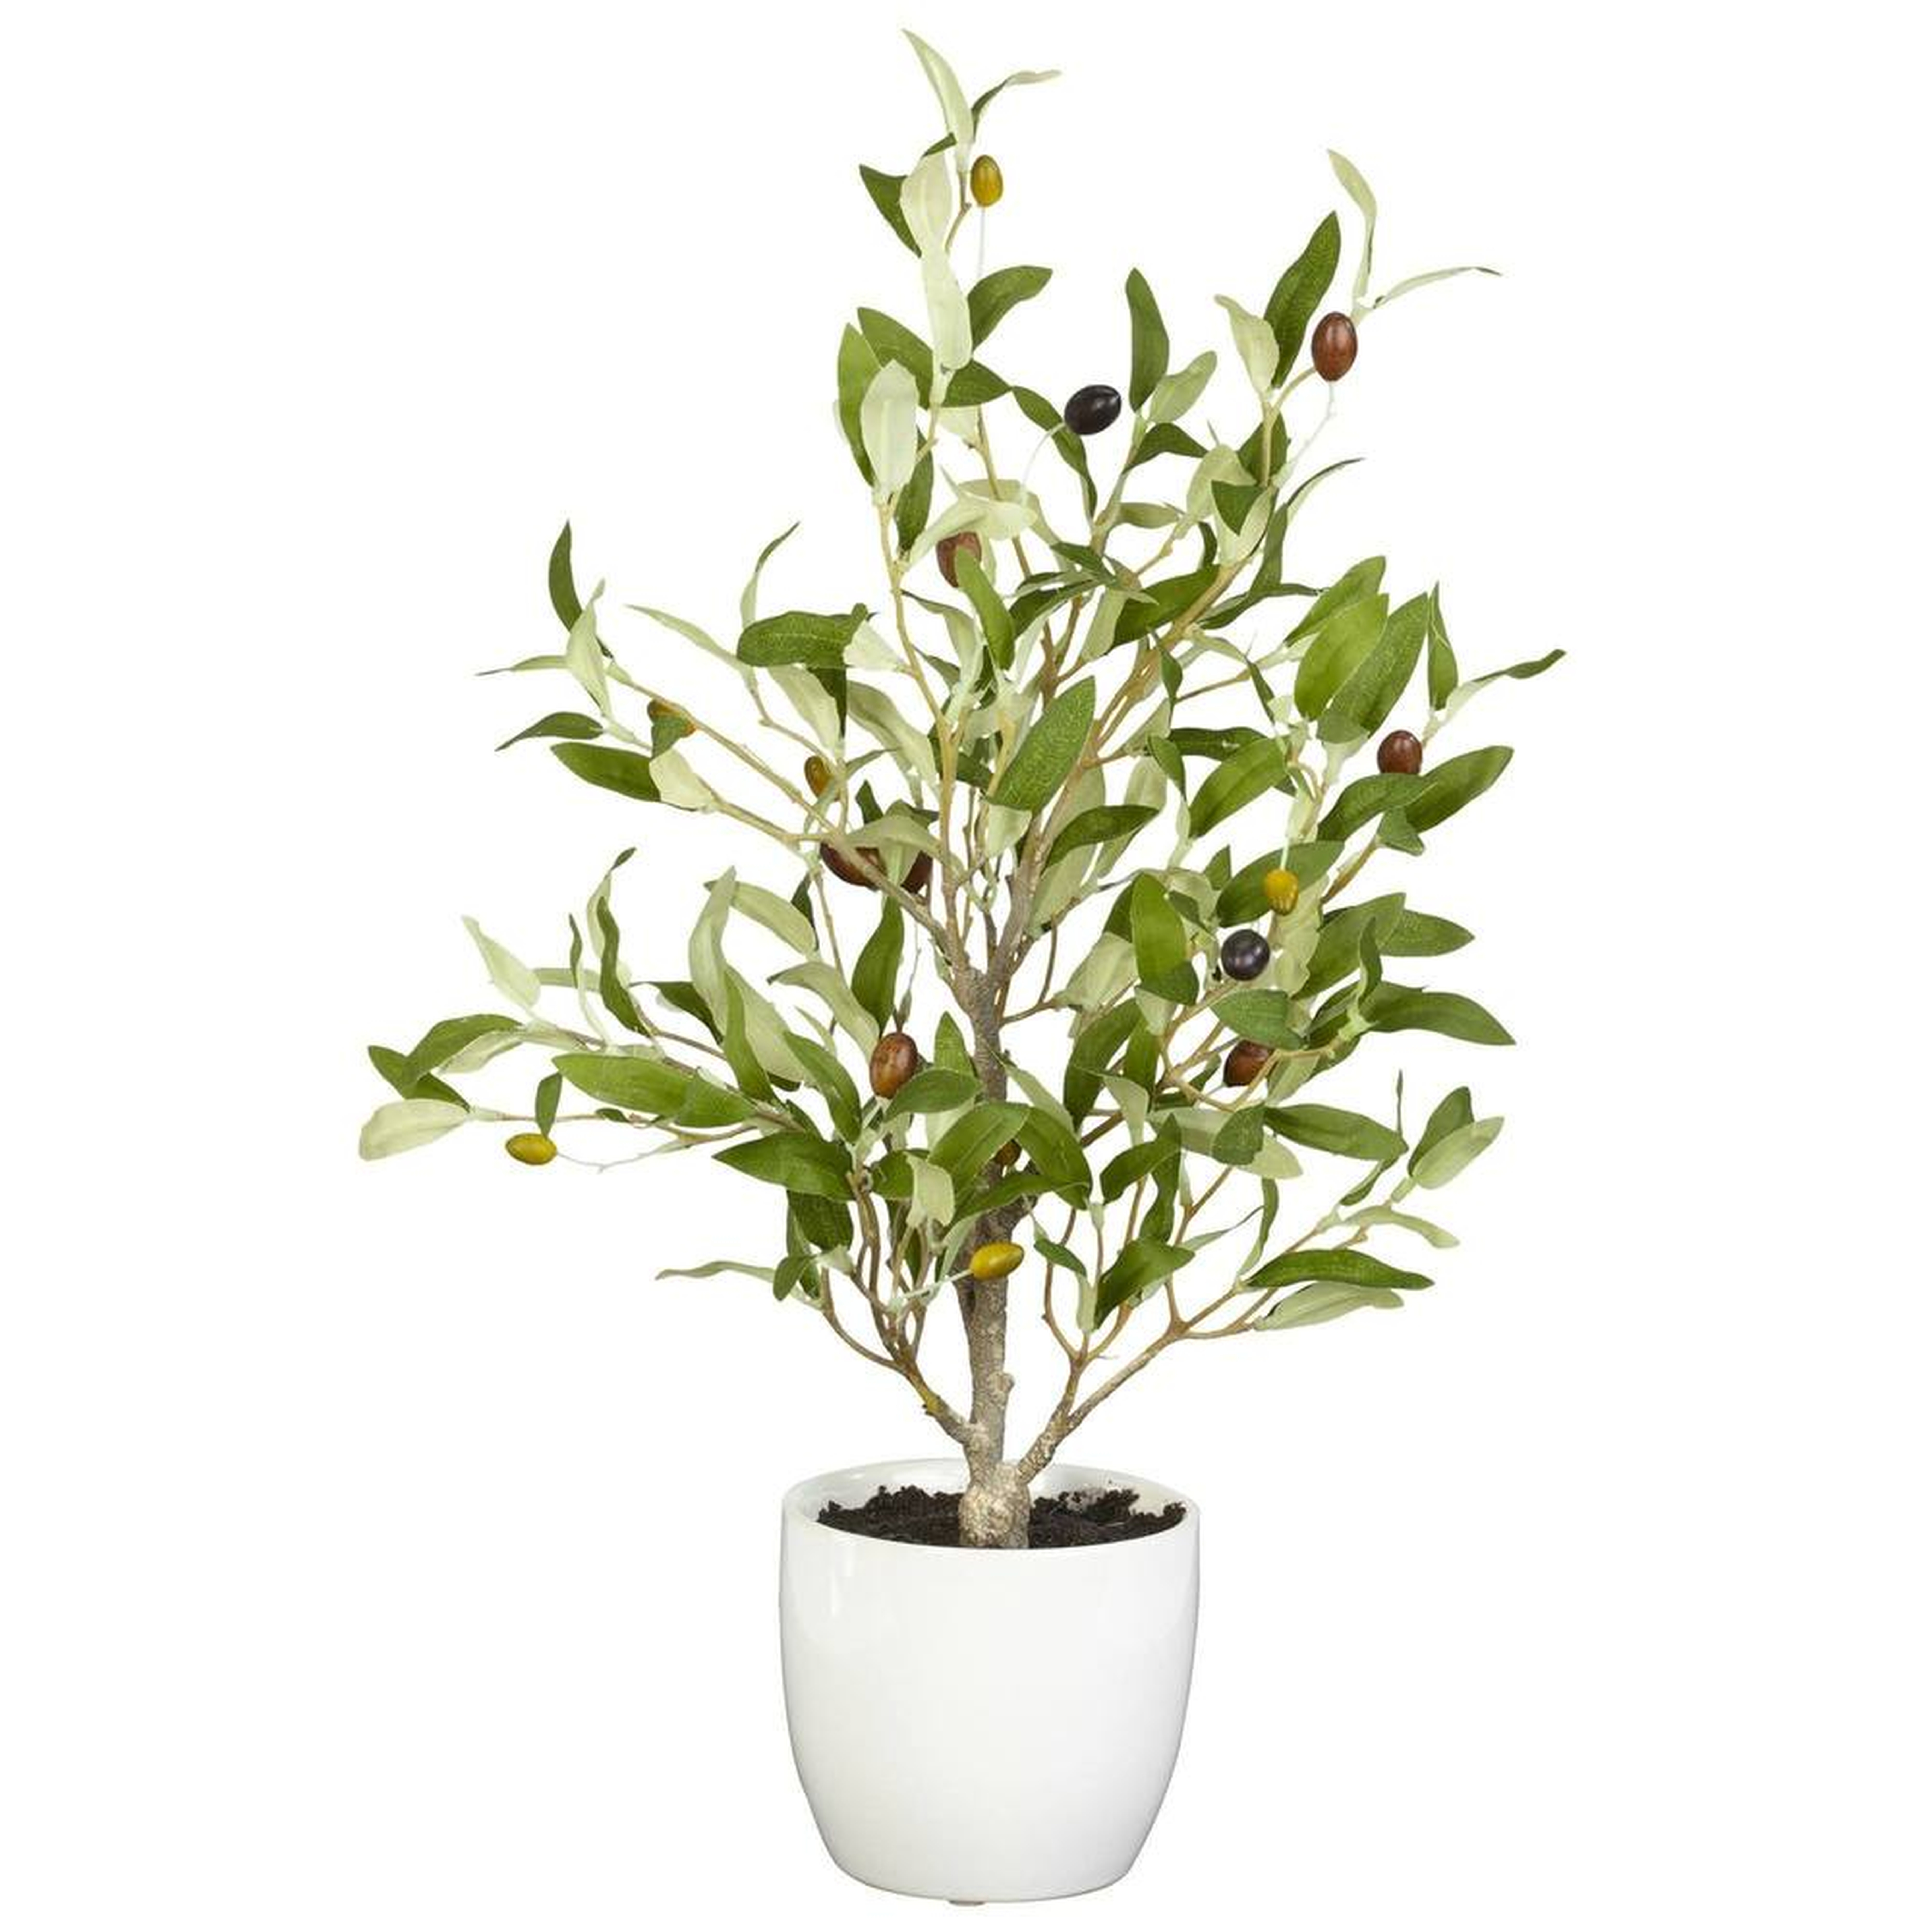 Olive Silk Tree with White Vase, 18", Set of 2 - Fiddle + Bloom